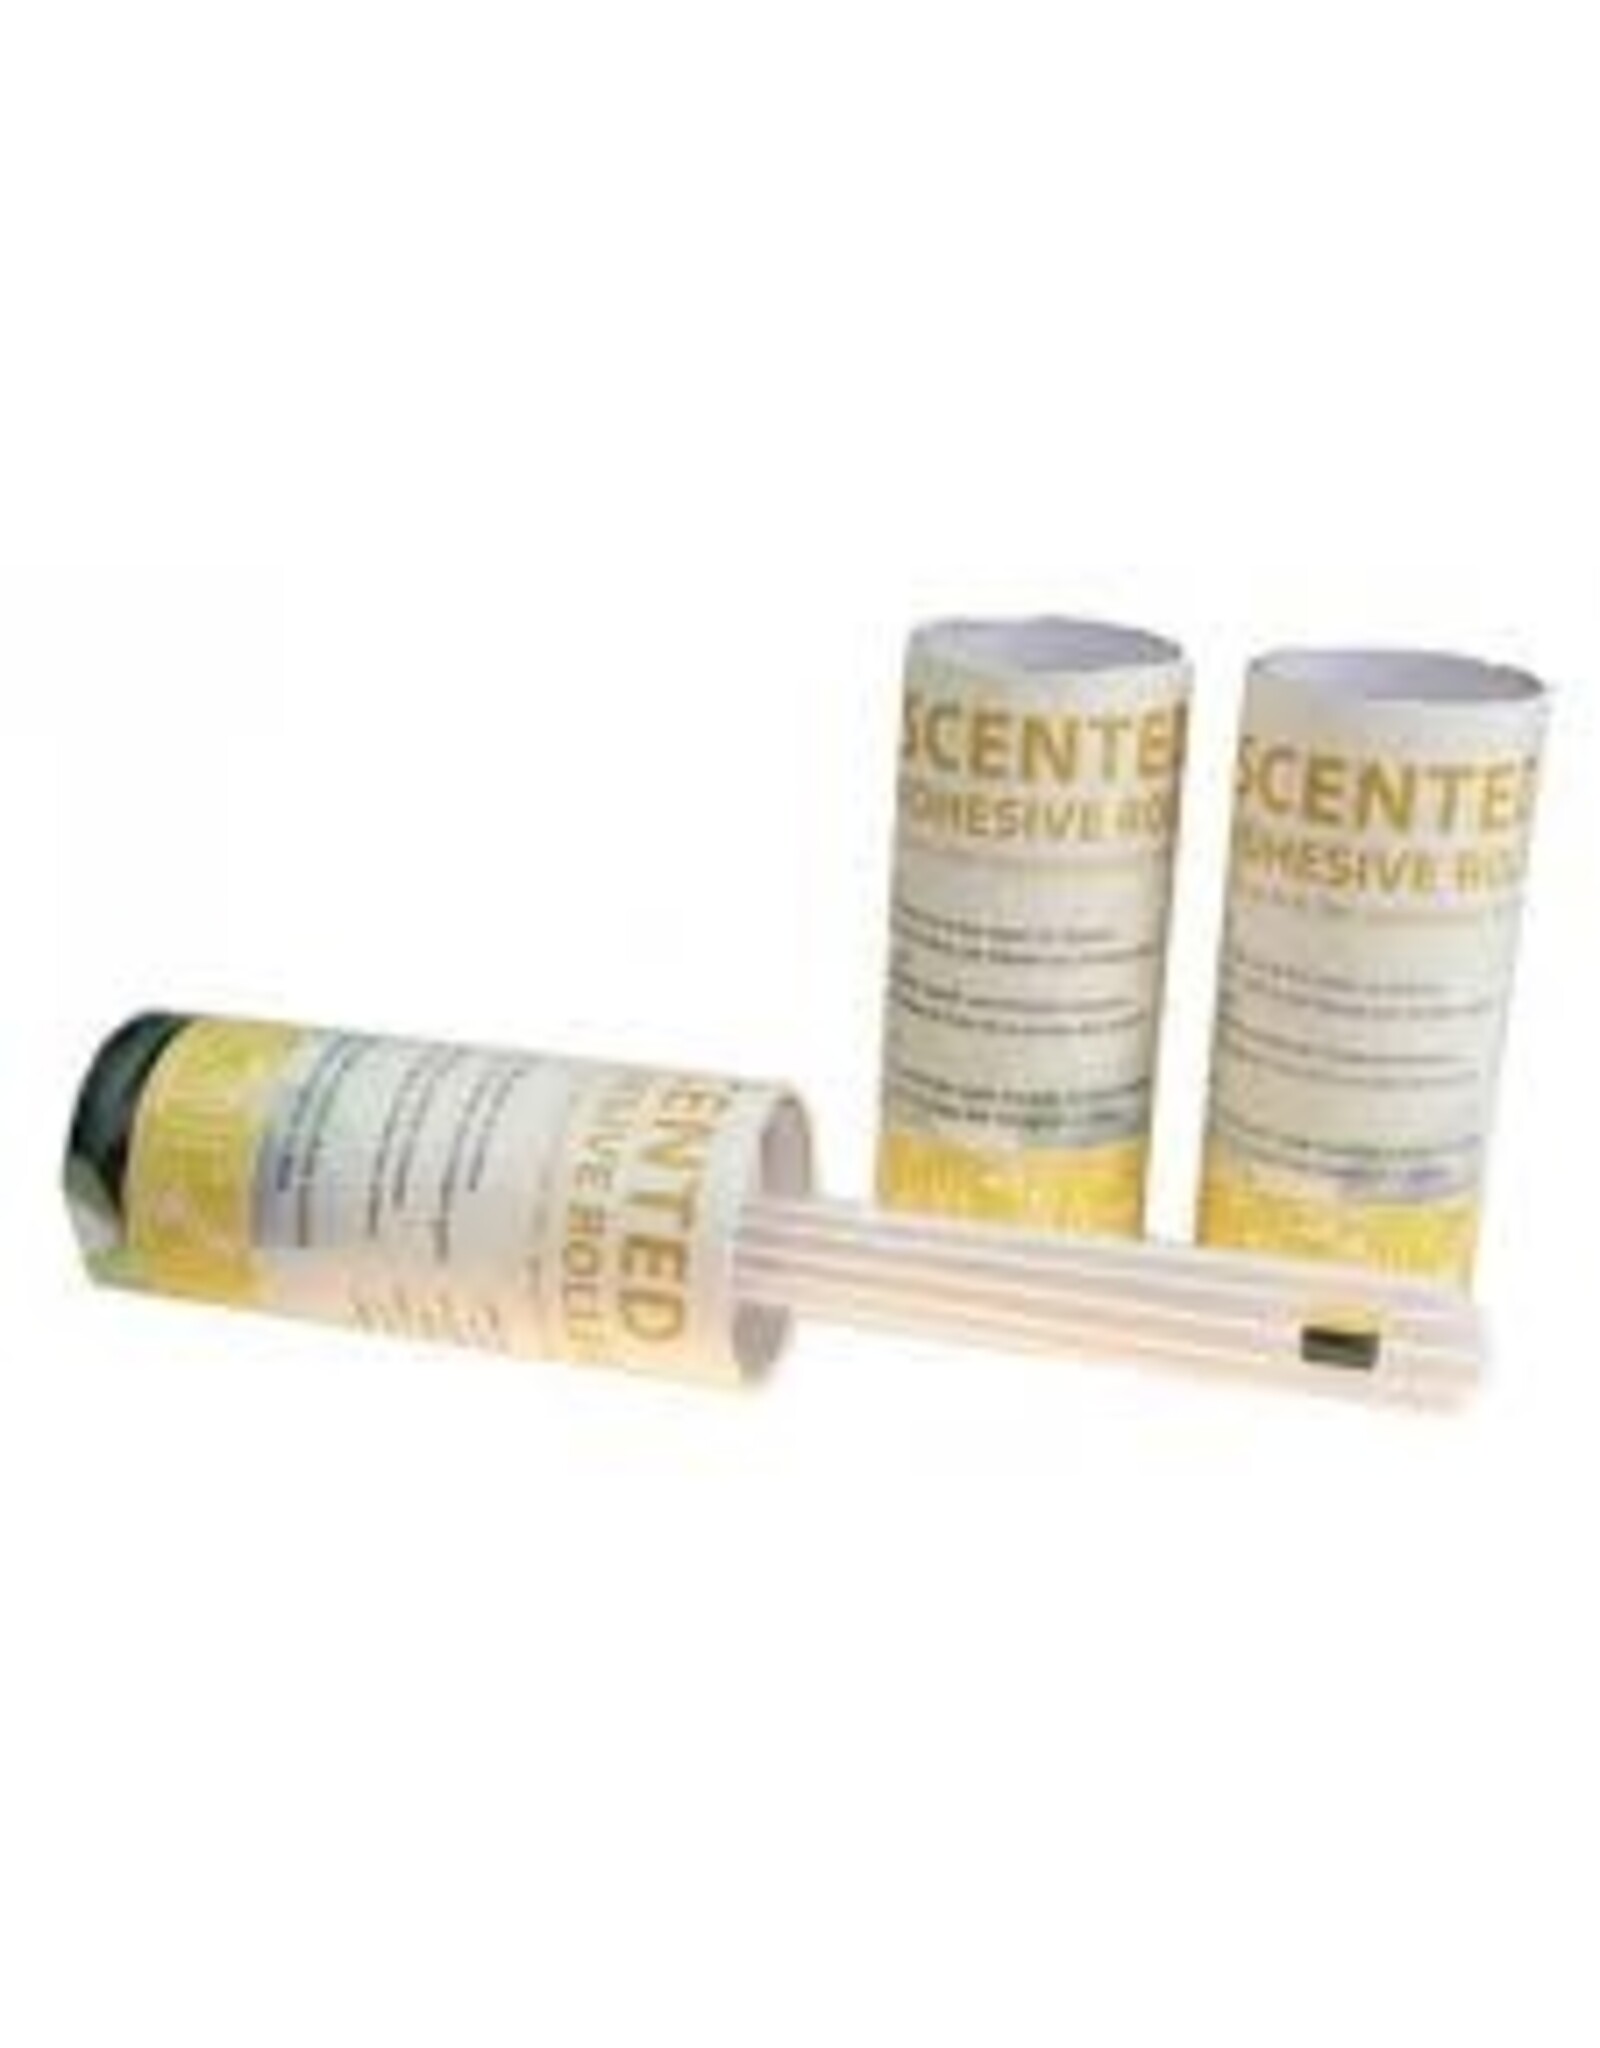 SCENTED ADHESIVE LINT ROLLER